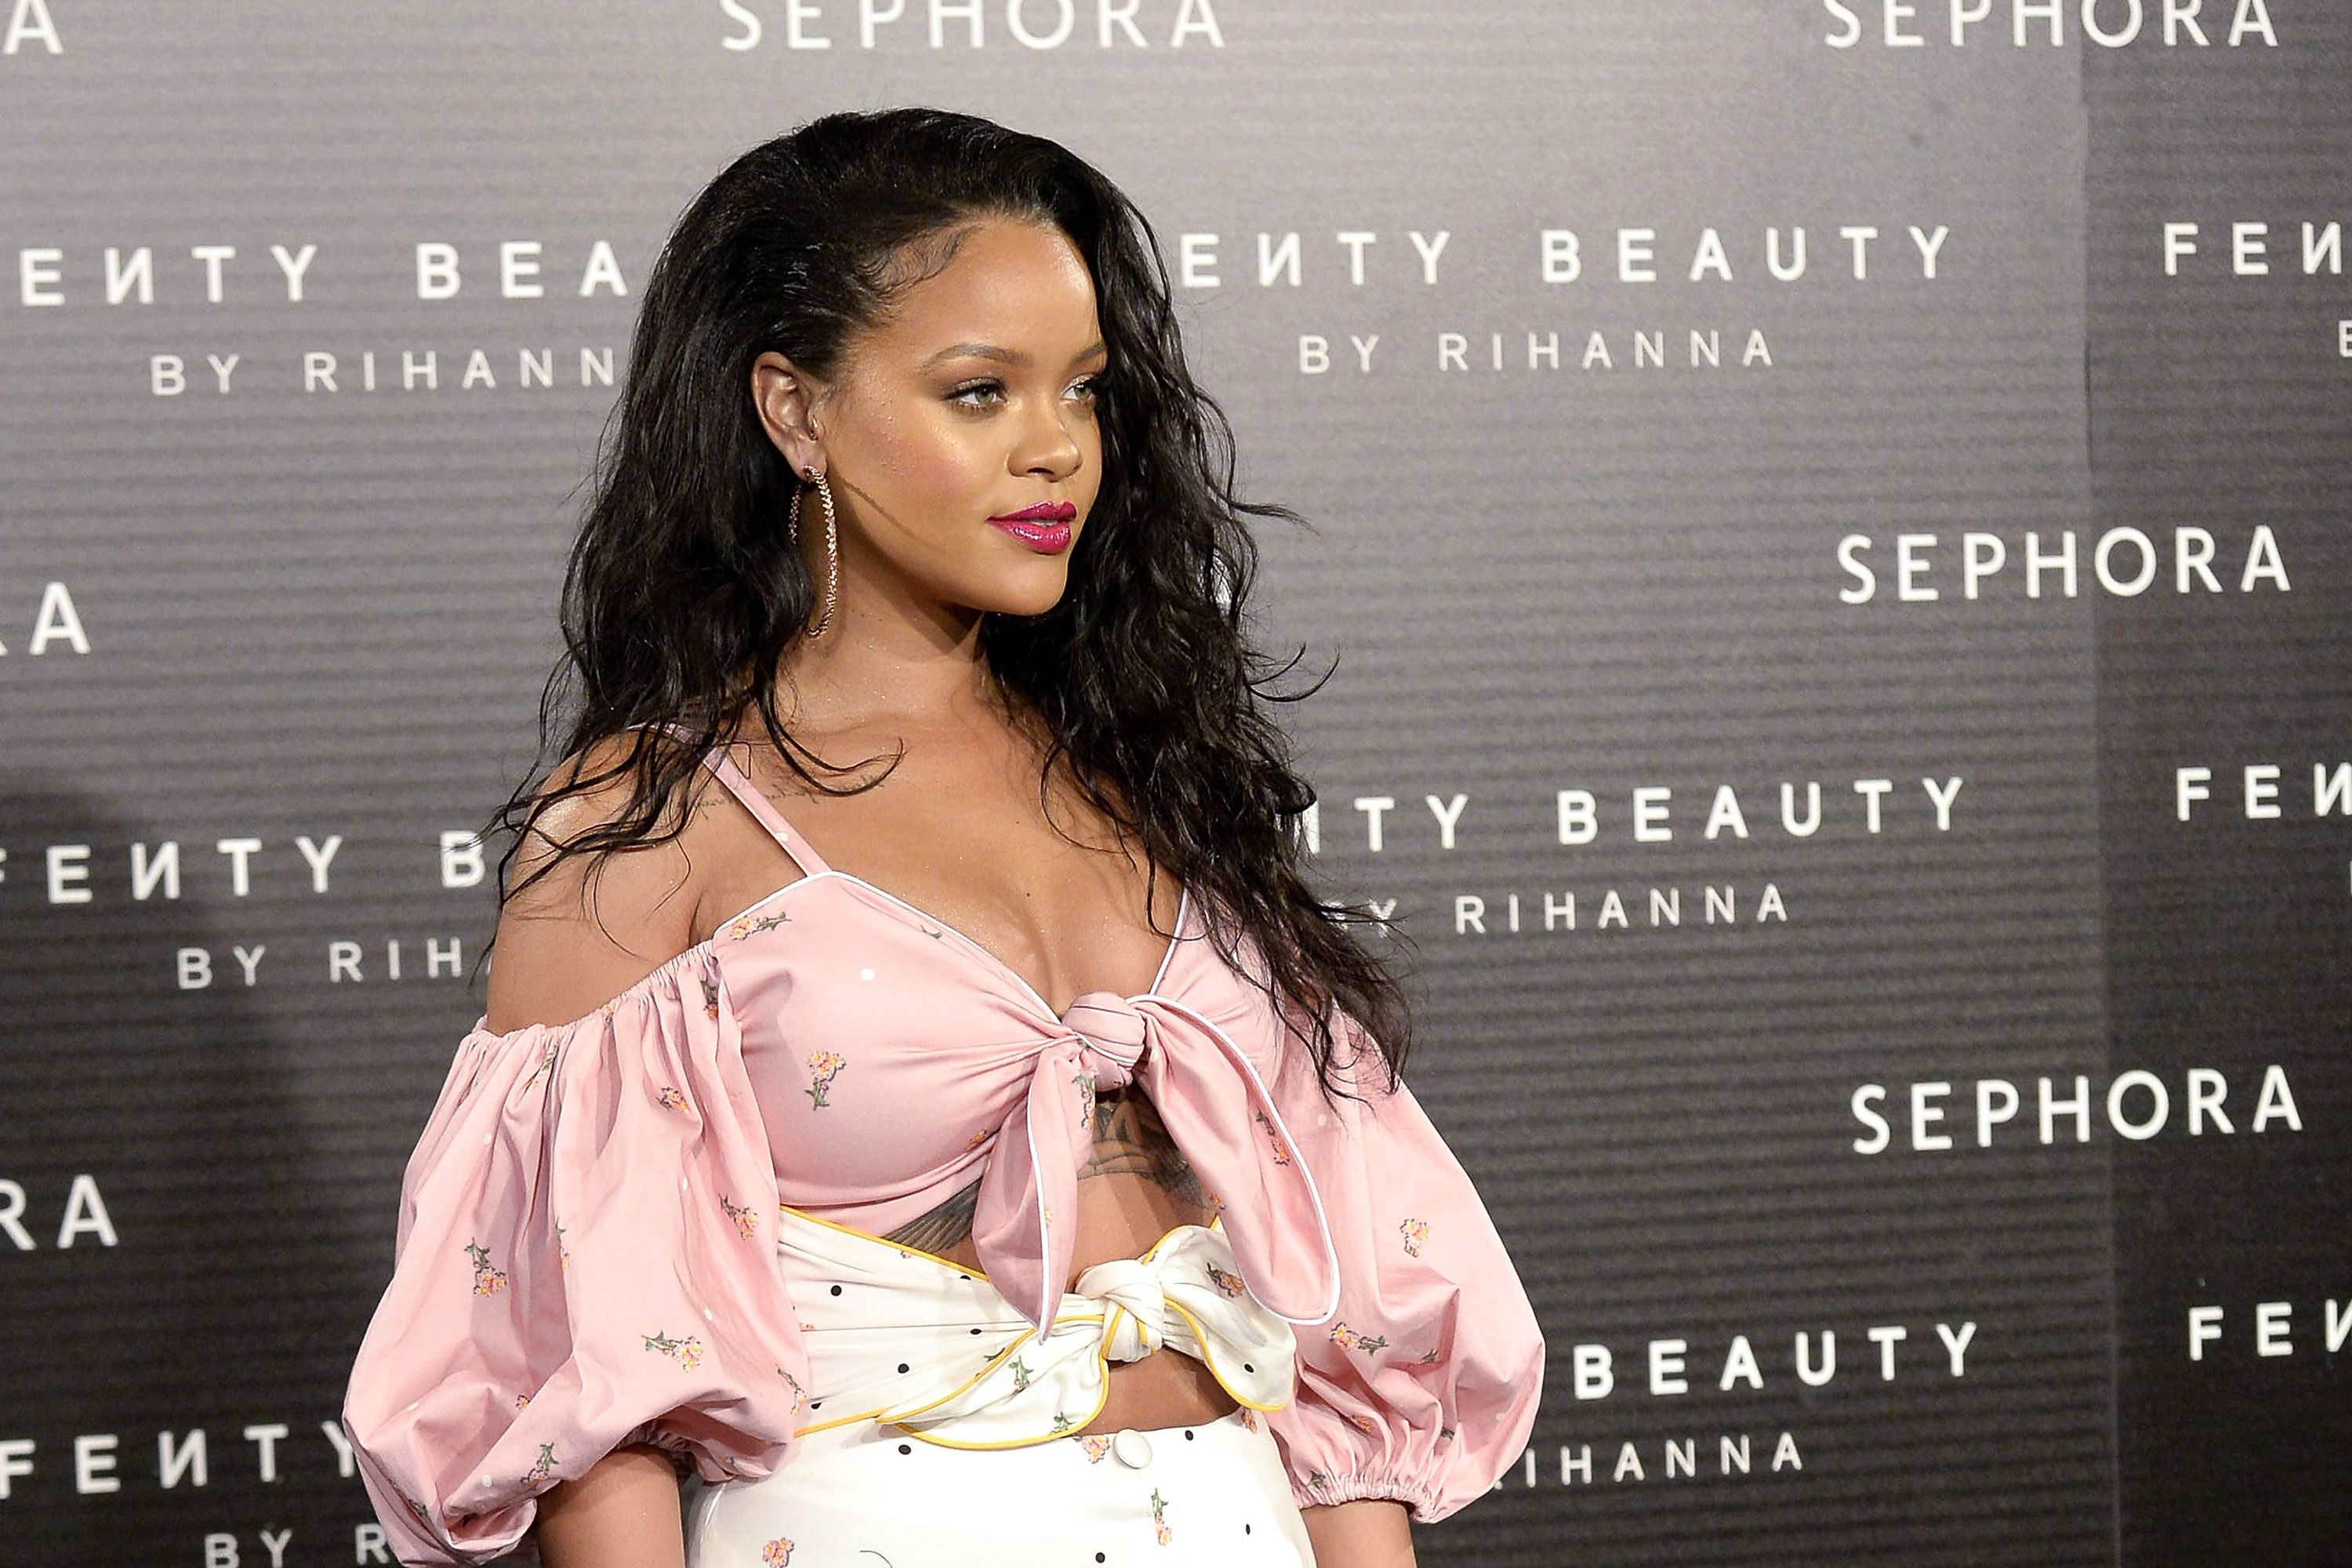 TIME Magazine named FentyBeauty as one of the Top 25 Best